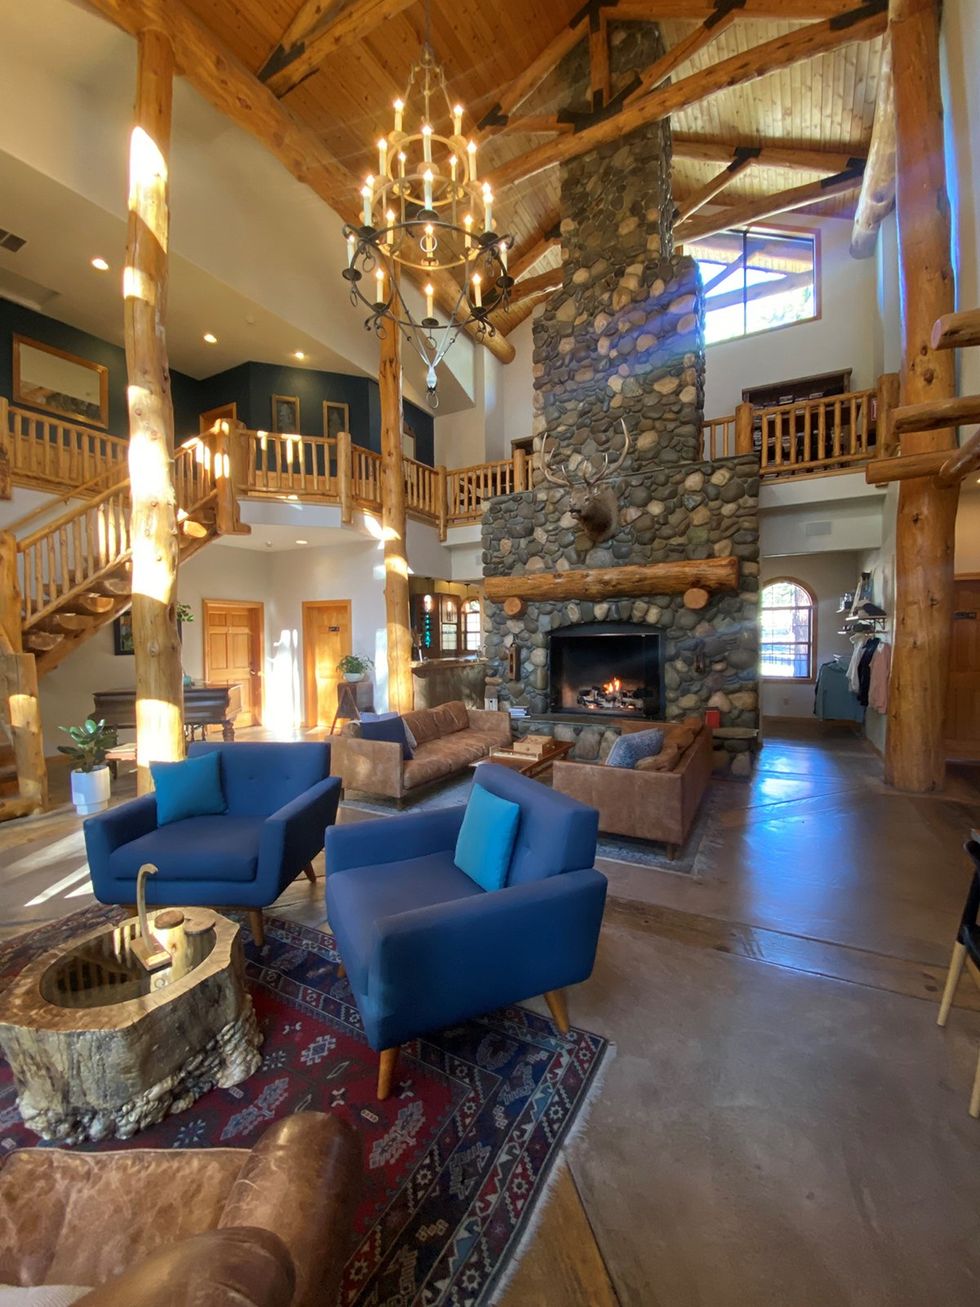 The expansive lobby of the Black Bear Lodge